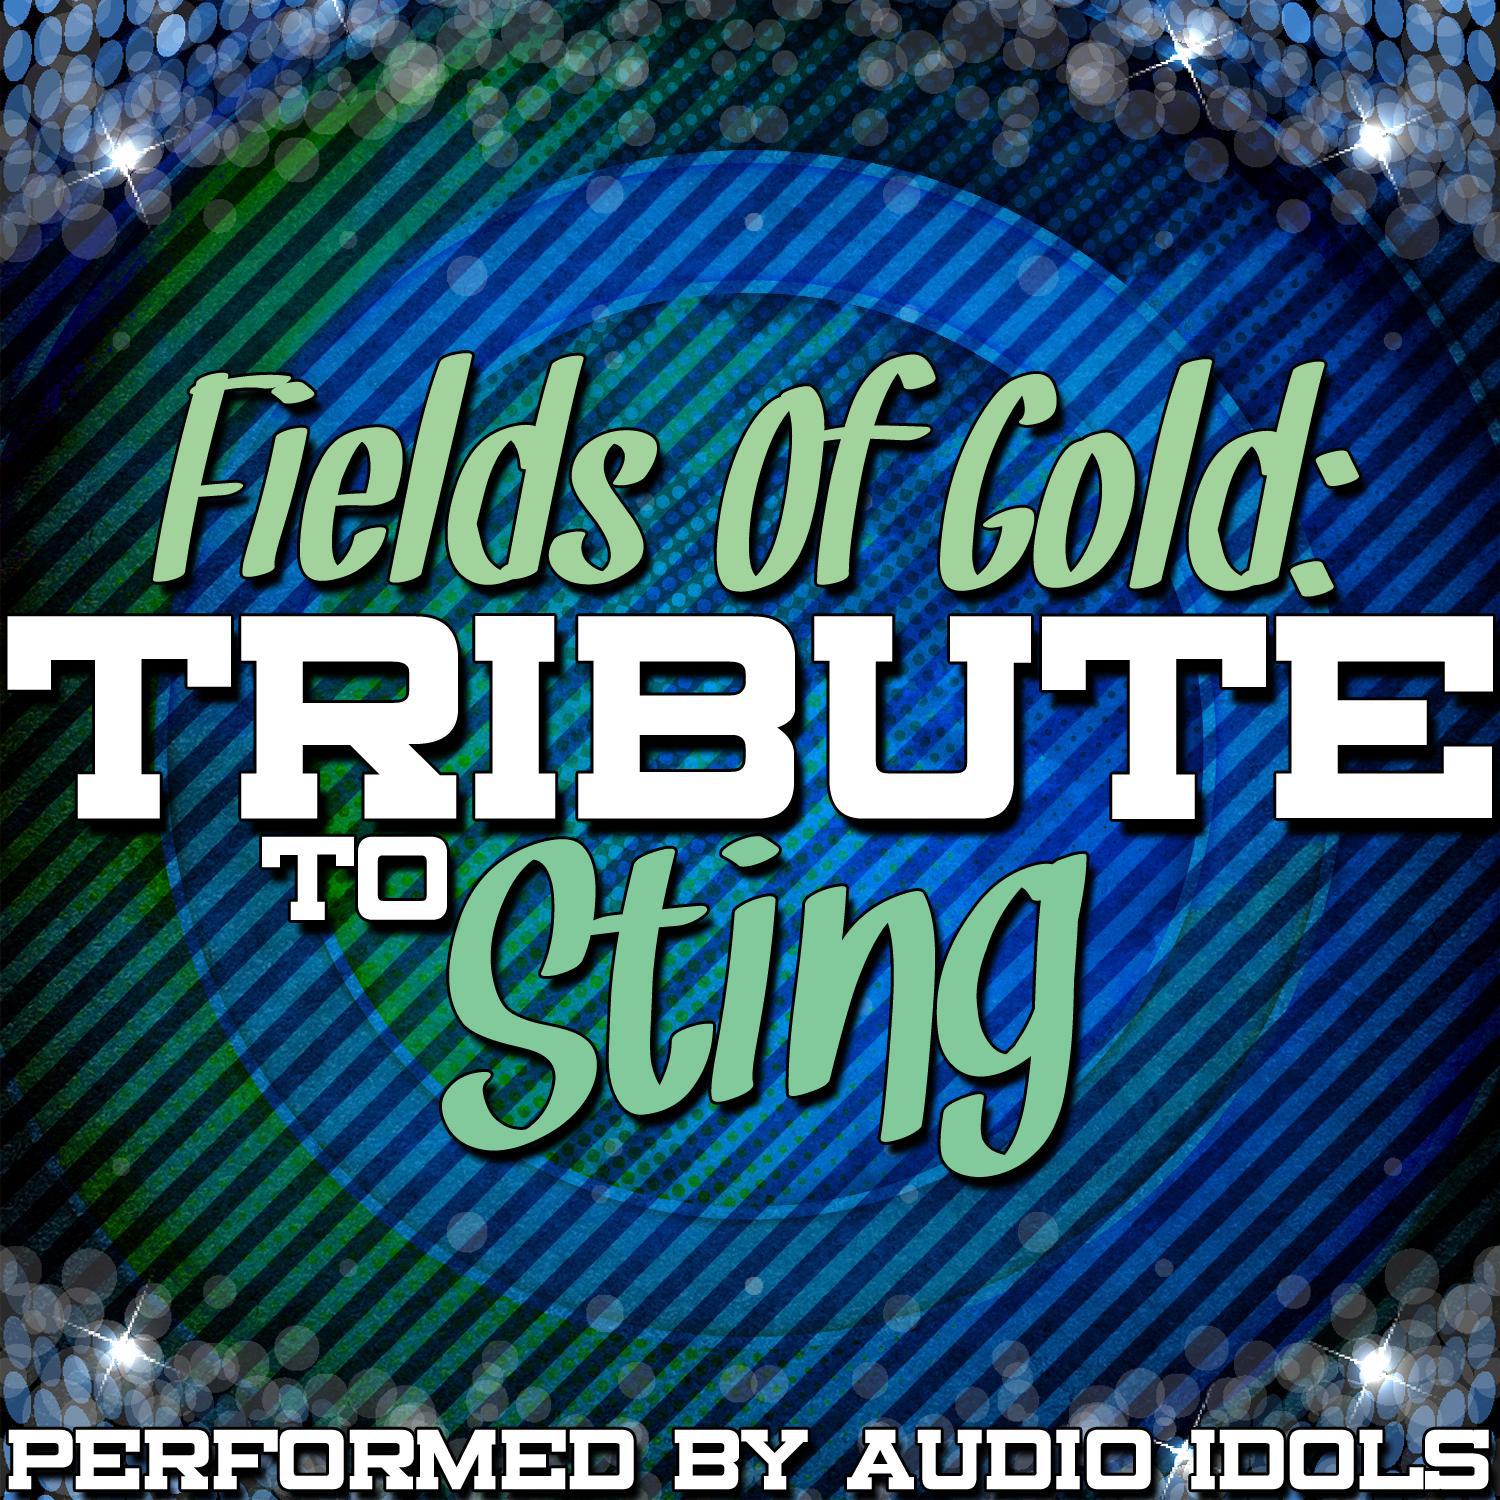 Fields of Gold: Tribute to Sting